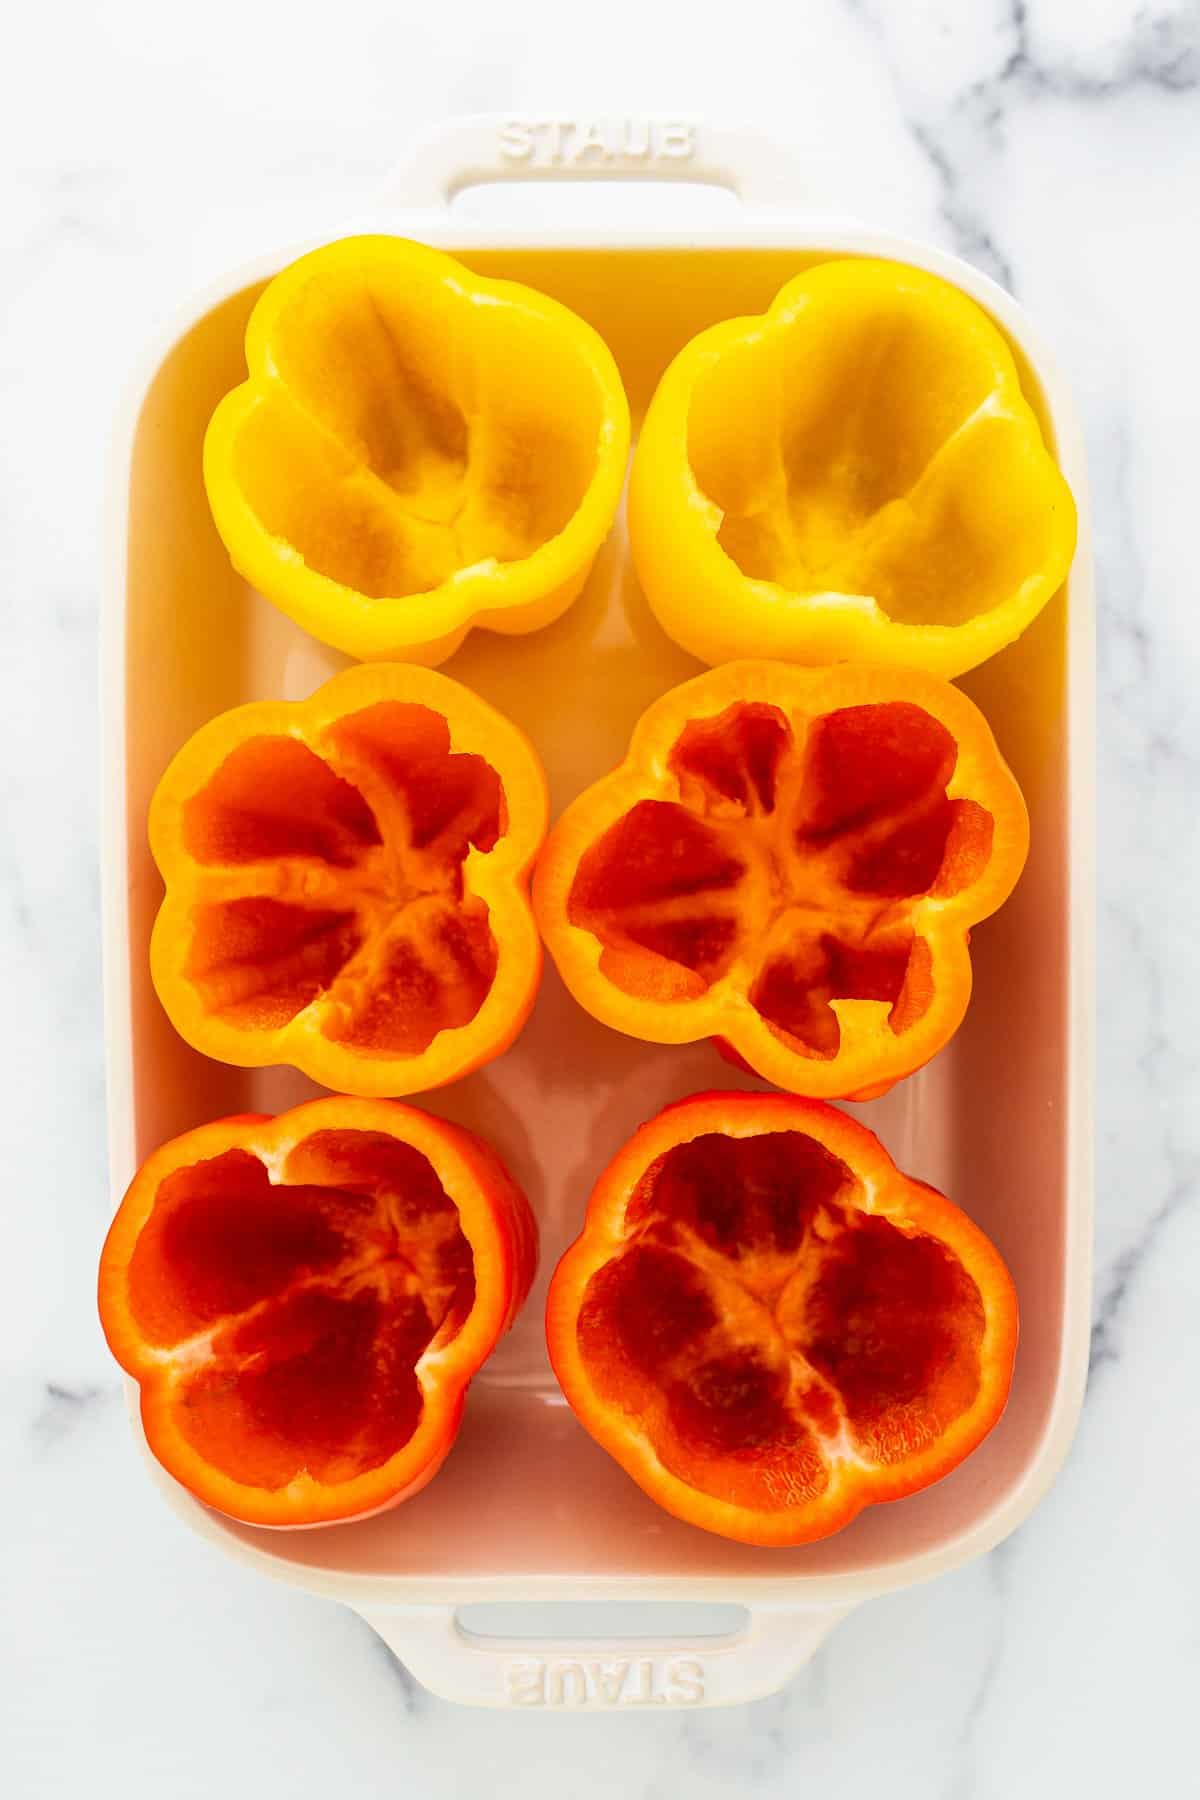 Bell peppers in a casserole dish.